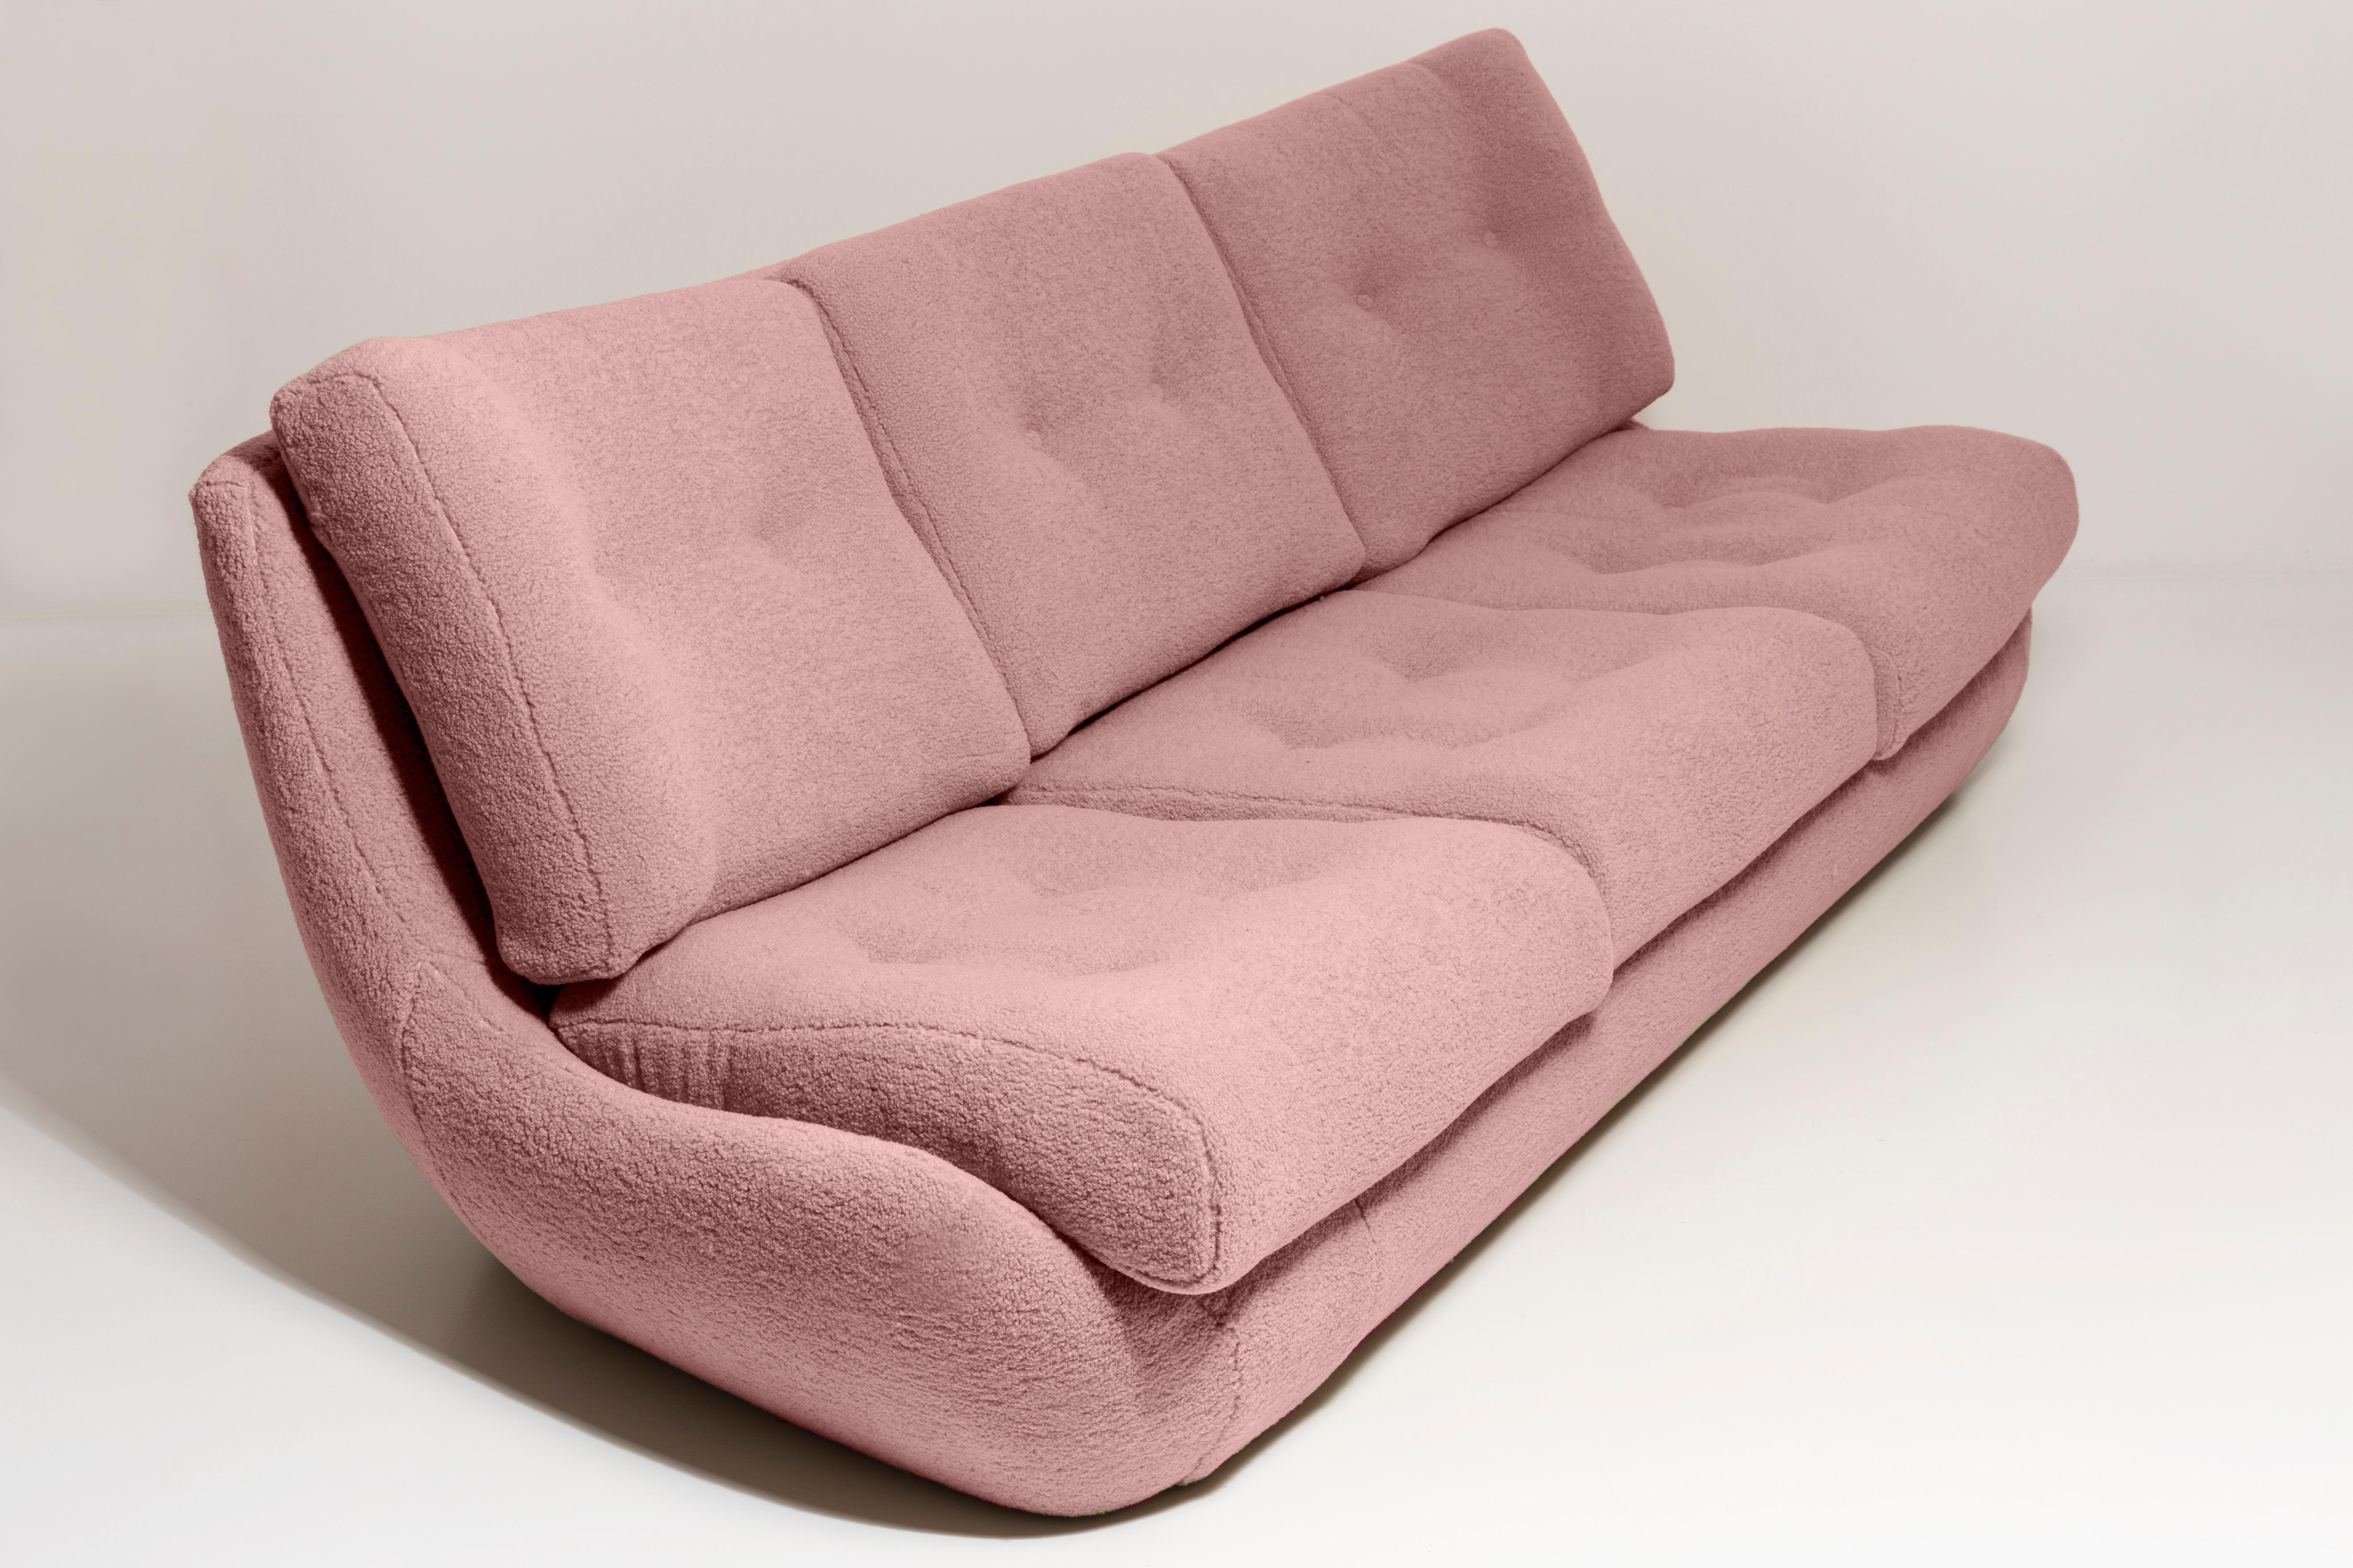 Velvet Pink Blush Boucle Atlantis Sofa and Armchairs, Europe, 1960s For Sale